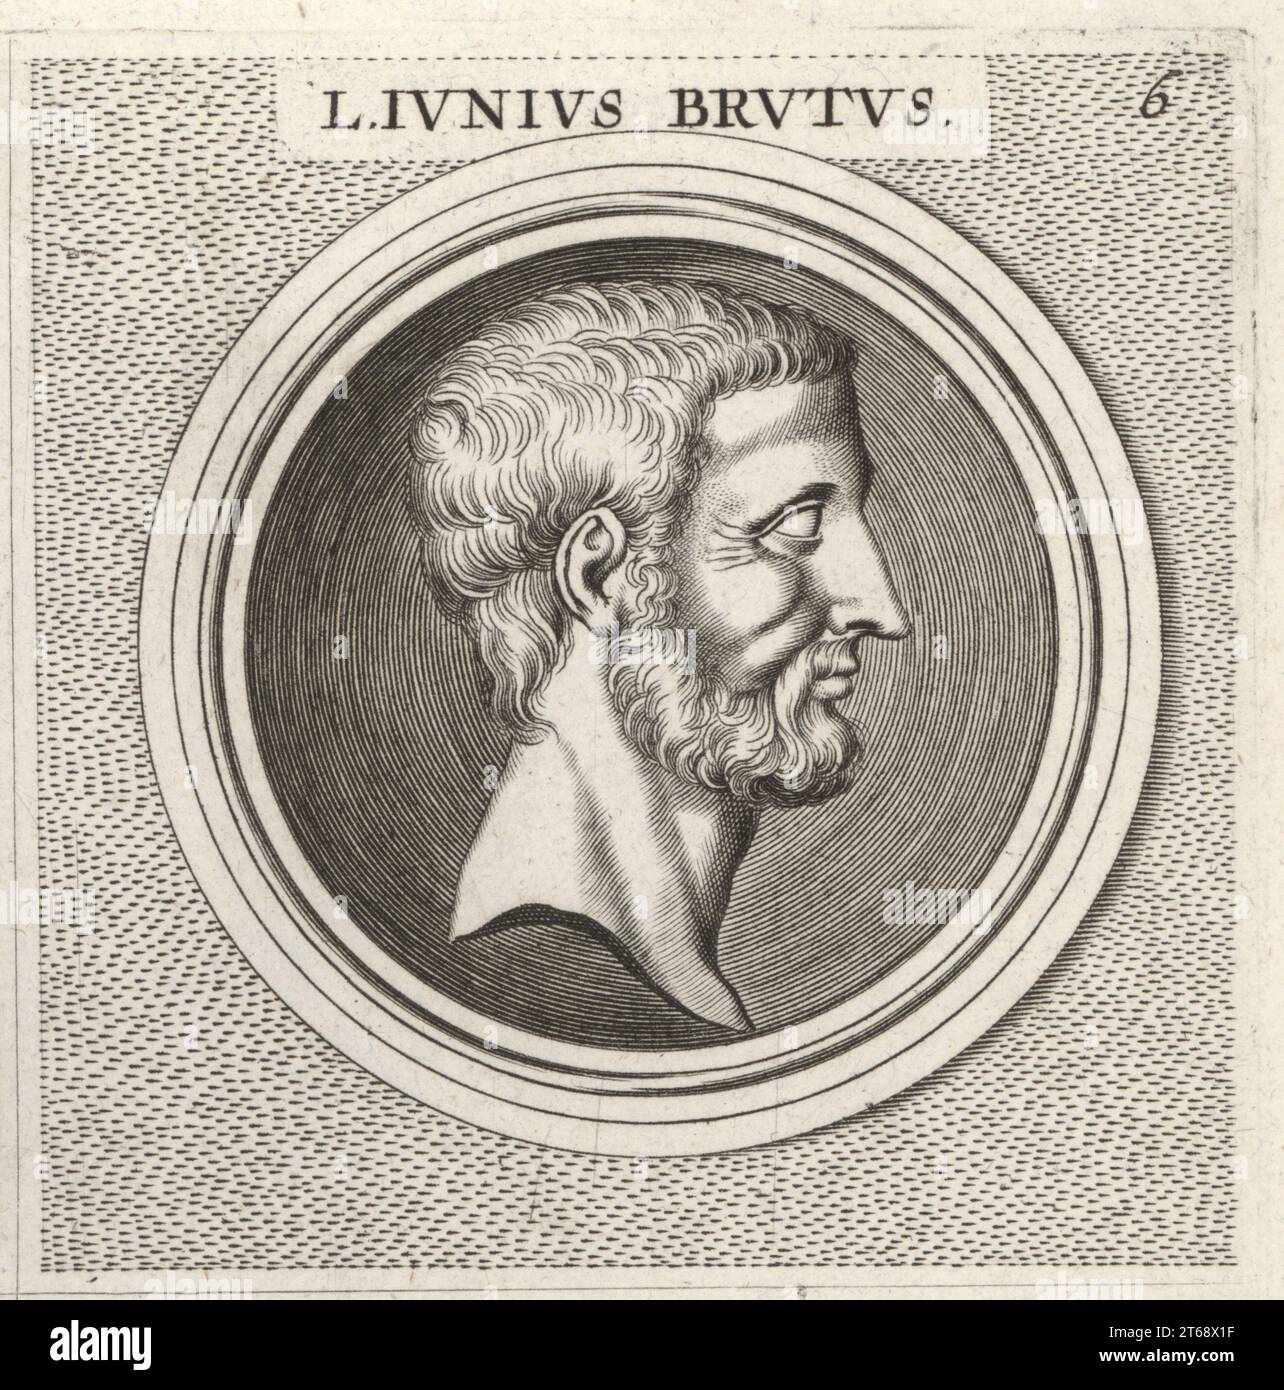 Lucius Junius Brutus, semi-legendary founder of the Roman Republic, 6th century BC. Traditionally one of its first consuls in 509 BC. L. Iunius Brutus. Copperplate engraving after an illustration by Joachim von Sandrart from his LAcademia Todesca, della Architectura, Scultura & Pittura, oder Teutsche Academie, der Edlen Bau- Bild- und Mahlerey-Kunste, German Academy of Architecture, Sculpture and Painting, Jacob von Sandrart, Nuremberg, 1675. Stock Photo